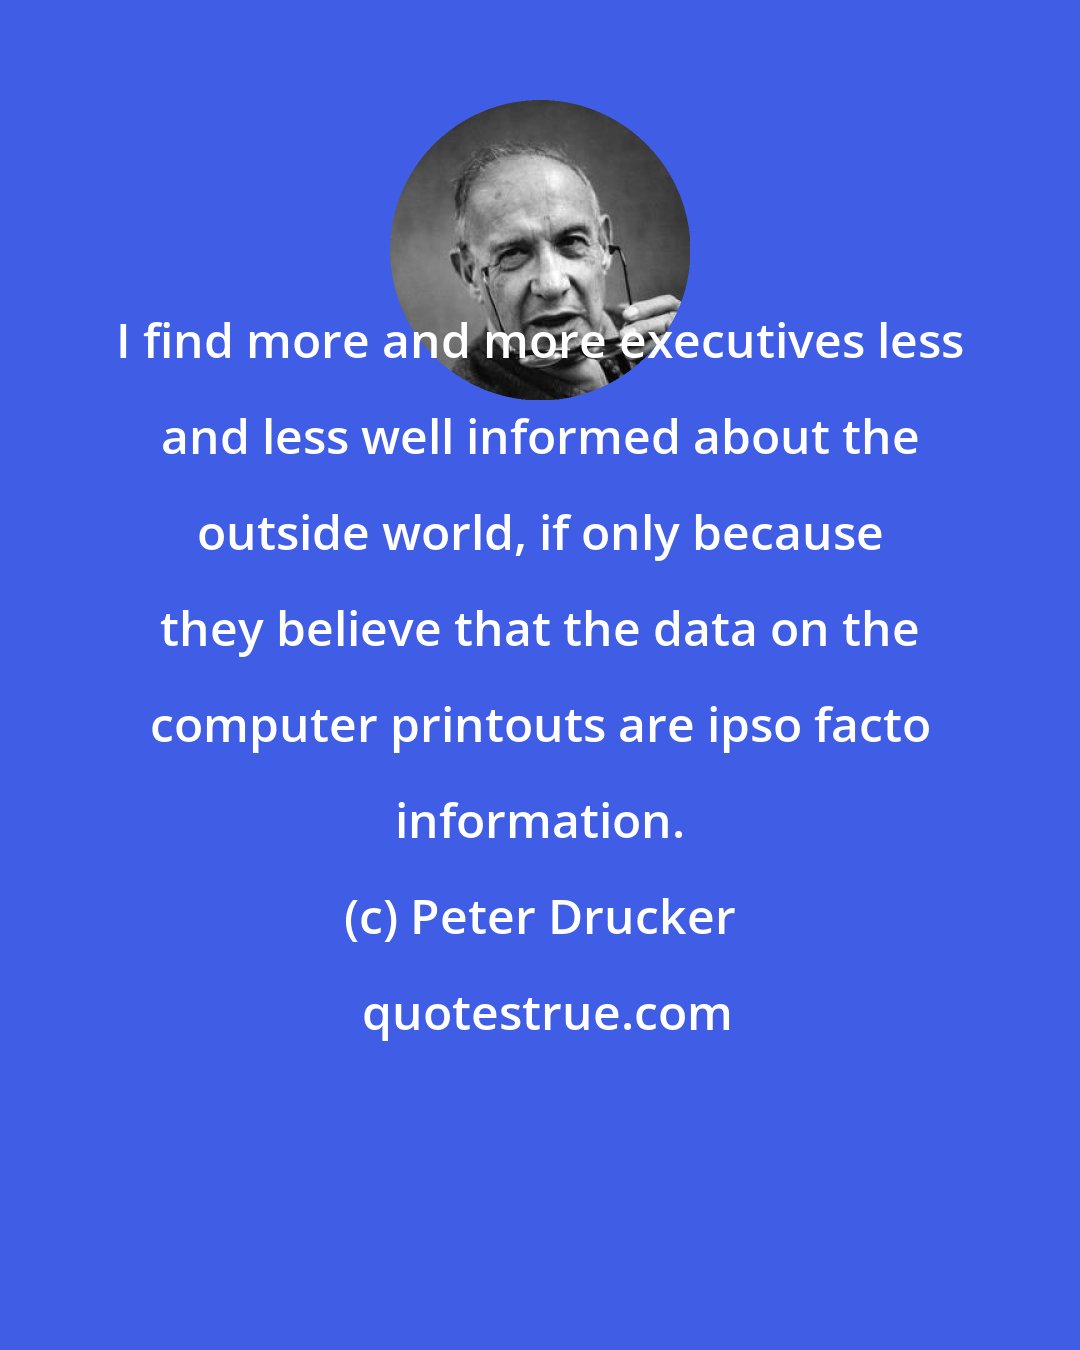 Peter Drucker: I find more and more executives less and less well informed about the outside world, if only because they believe that the data on the computer printouts are ipso facto information.